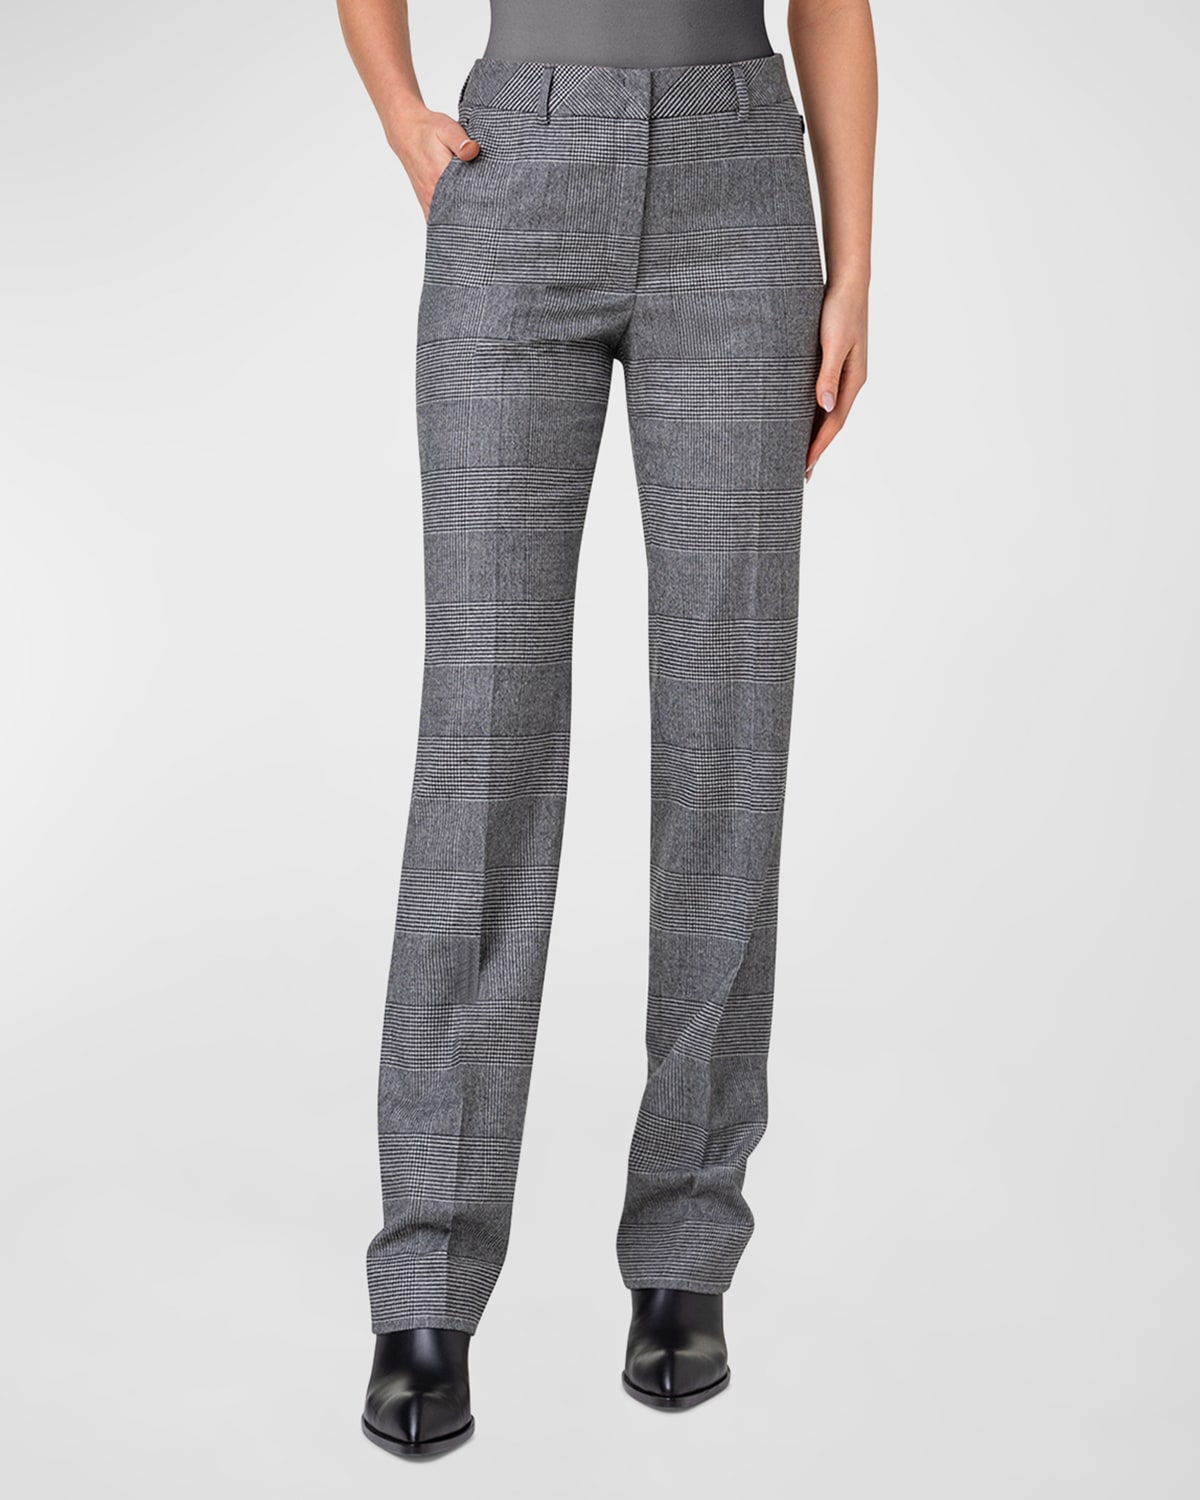 Meghan Prince Of Wales Wool Cashmere Pants